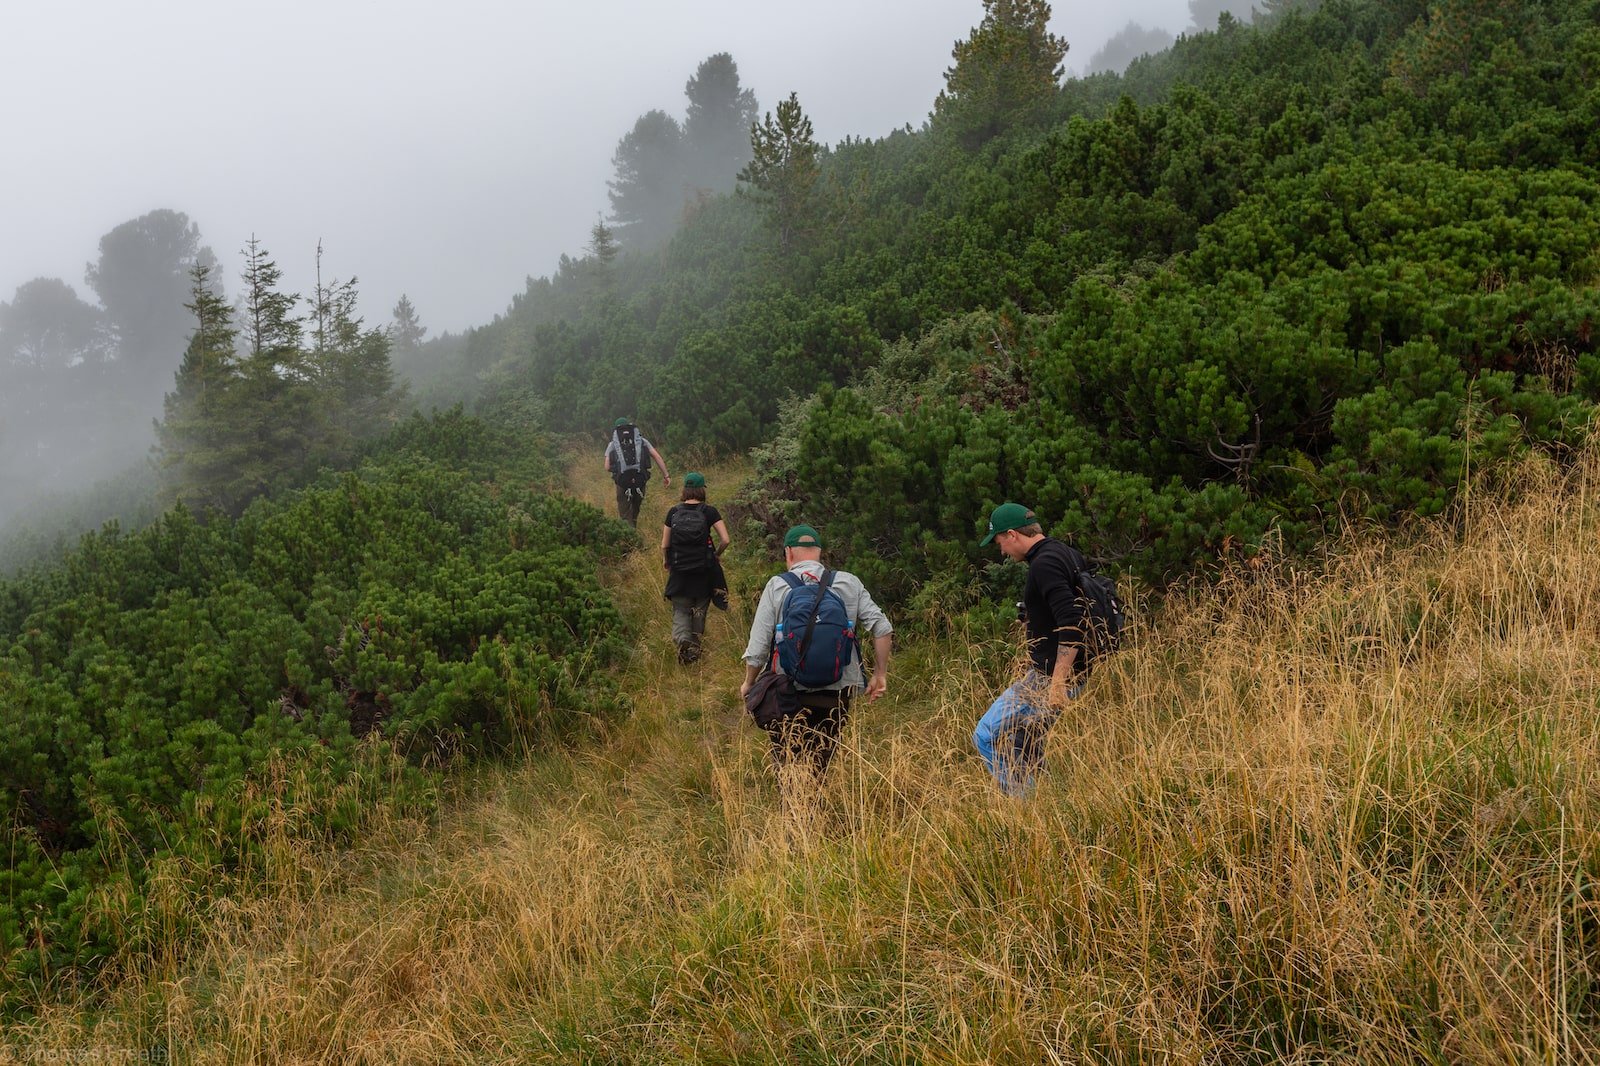 A line of people in hiking gear walk through a misty forest